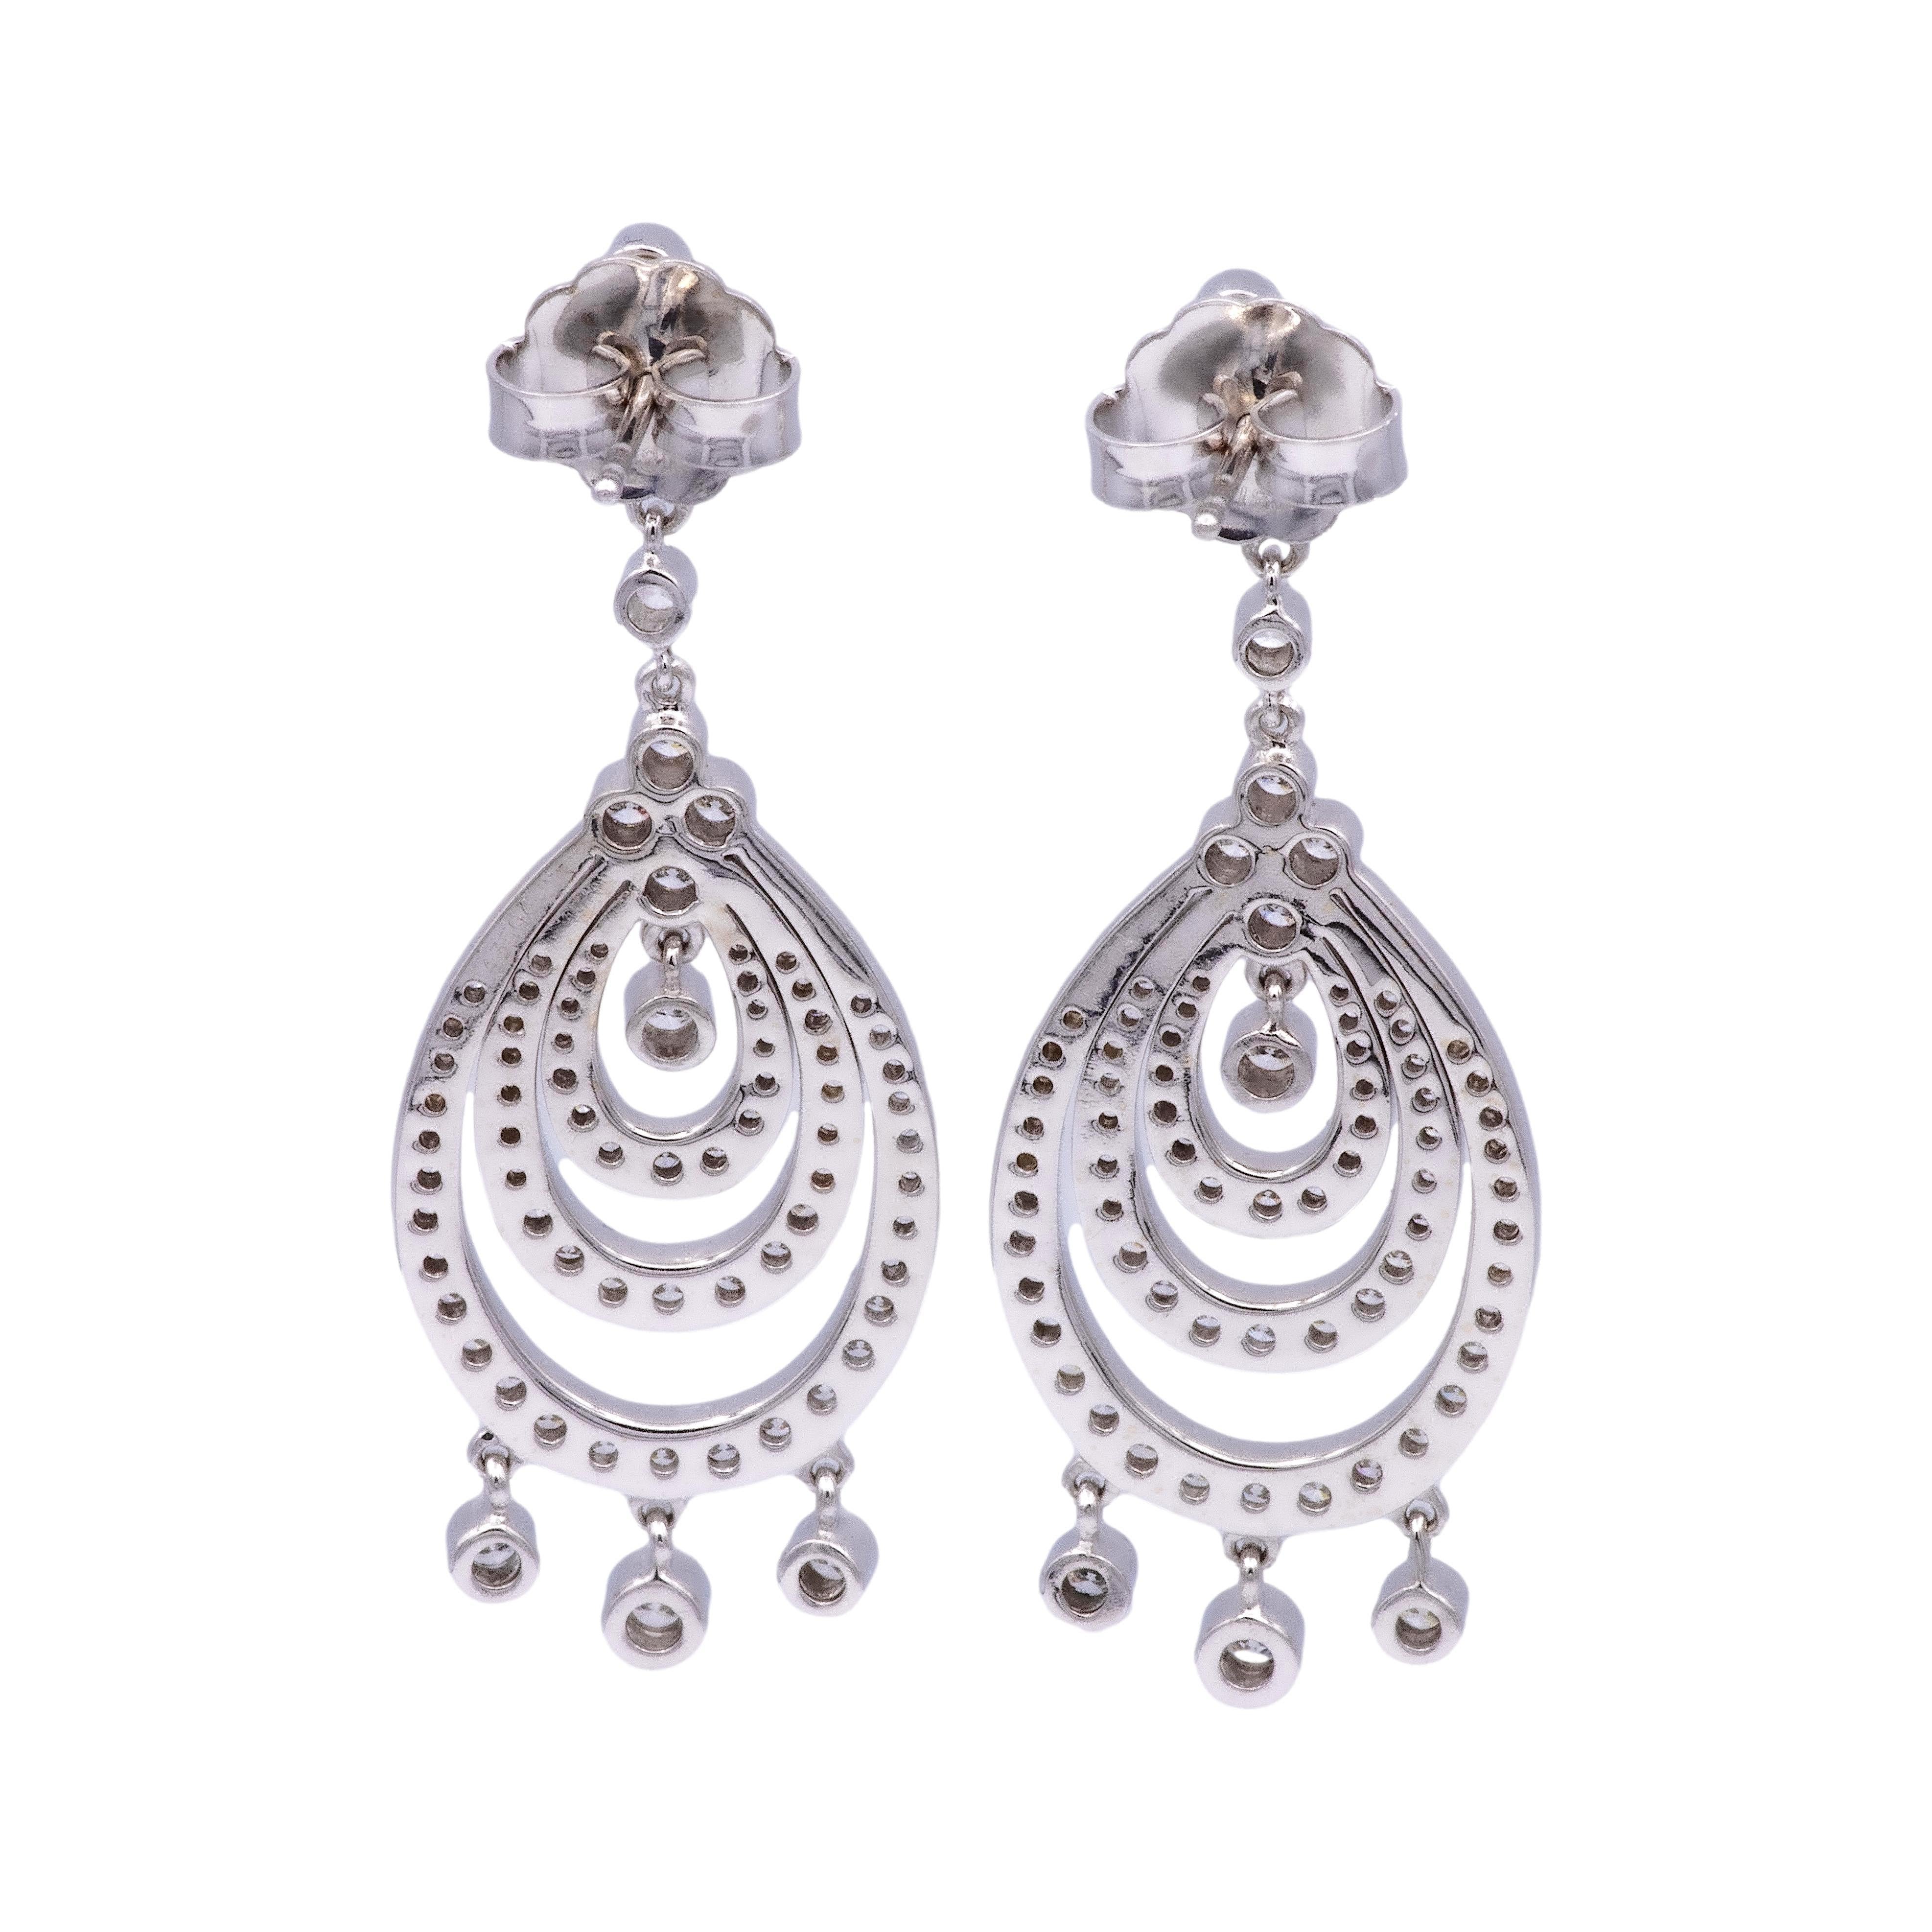 Pair of chandelier drop diamond earrings signed by KWIAT finely crafted in 18 karat white gold featuring channel and bezel set round brilliant cut diamonds weighing 3 carats total weight approximately in F-G color and VVS clarity. The earrings have